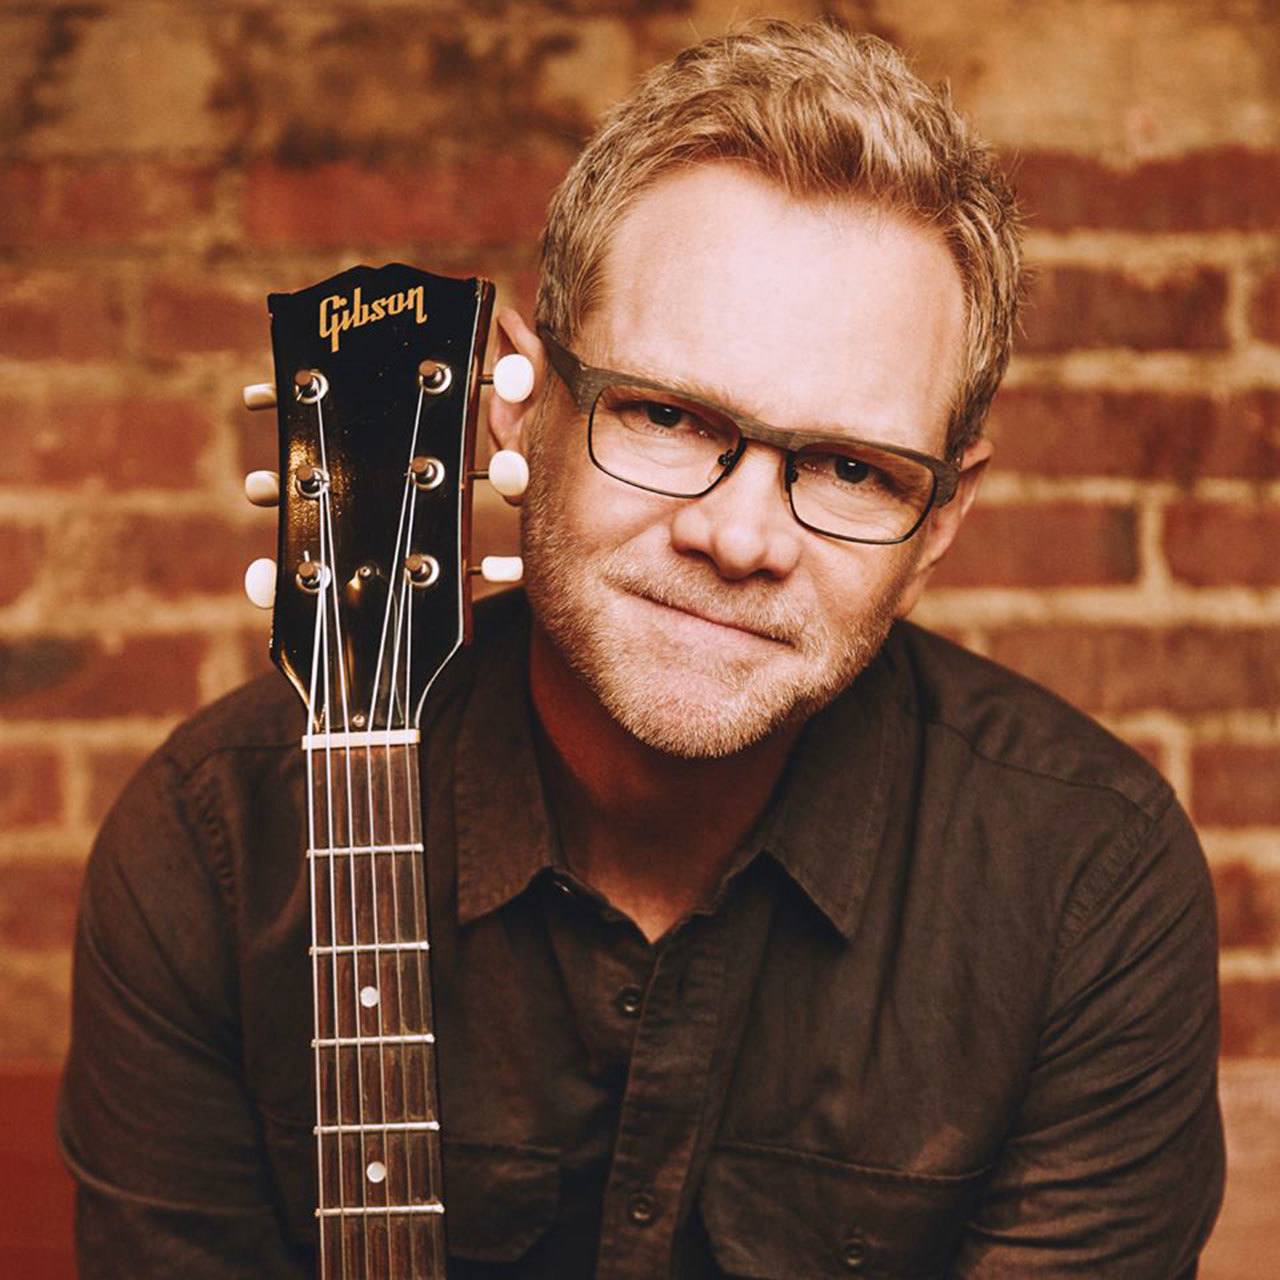 In a career that has spanned 30 years, Steven Curtis Chapman is the most awarded artist in Christian music history with 58 Gospel Music Association Dove Awards, five Grammy’s, an American Music Award, 48 No. 1 singles, selling more than 11 million albums and with eight RIAA-certified gold or platinum albums to his credit. COURTESY PHOTO